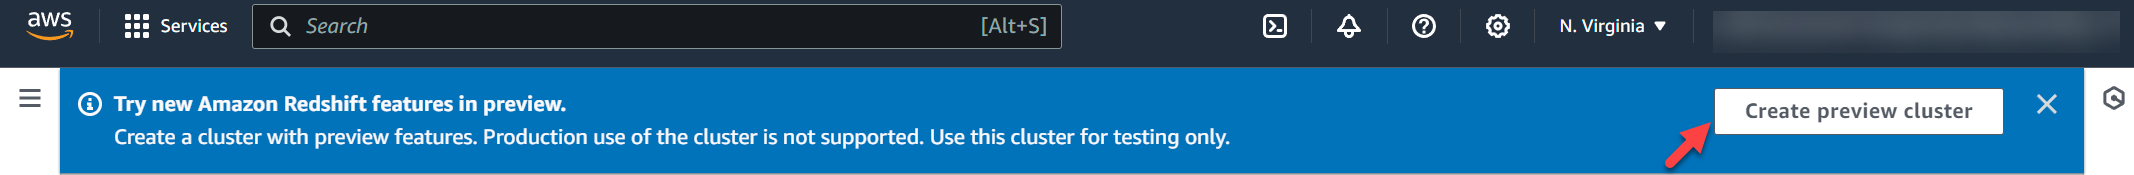 Create preview cluster